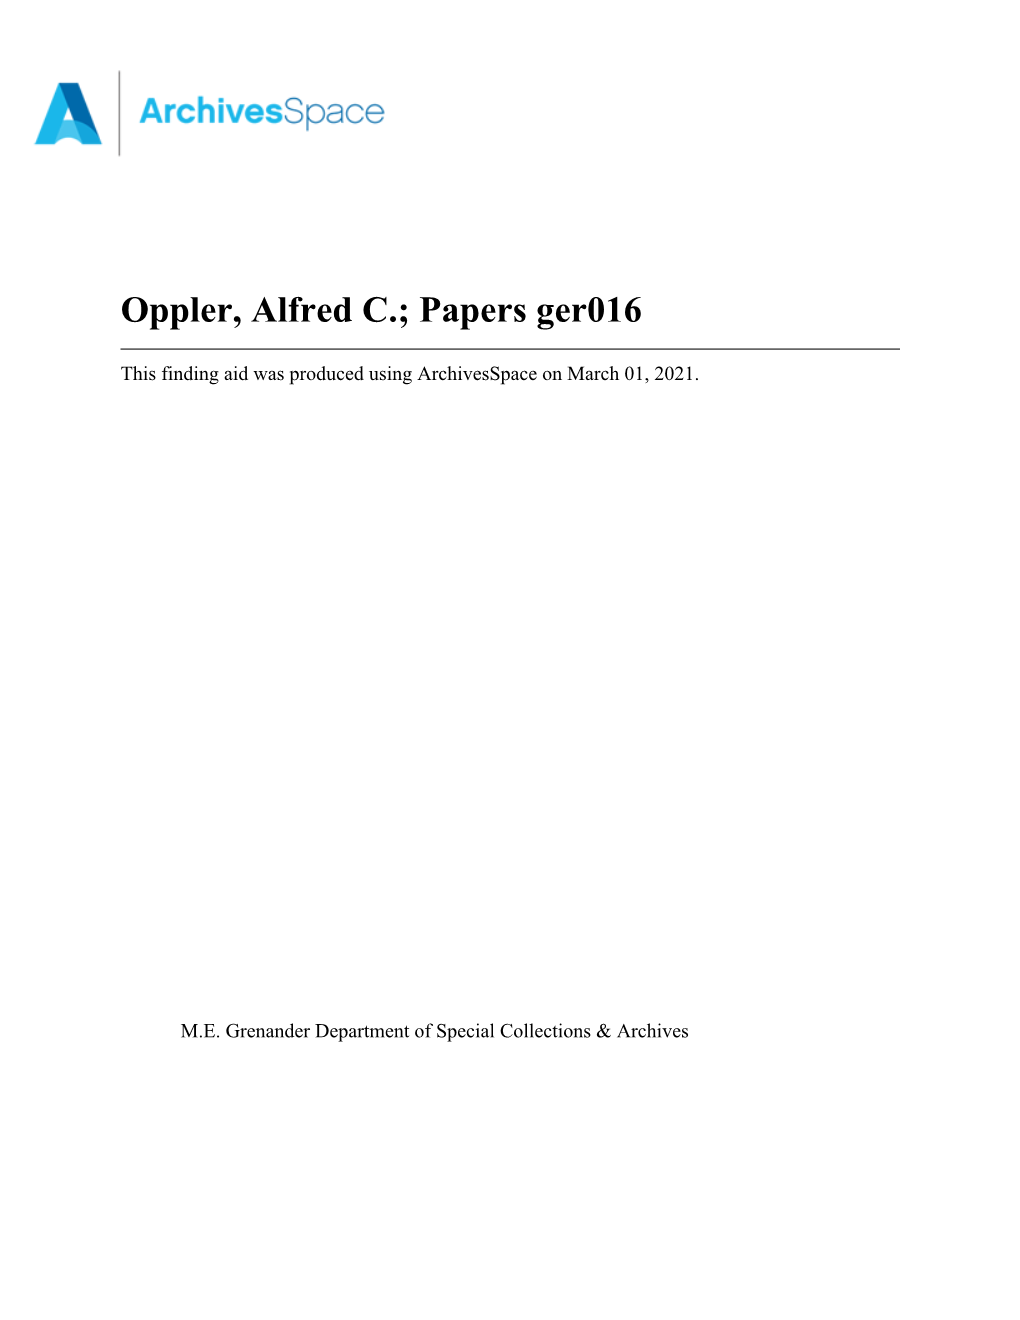 Oppler, Alfred C.; Papers Ger016